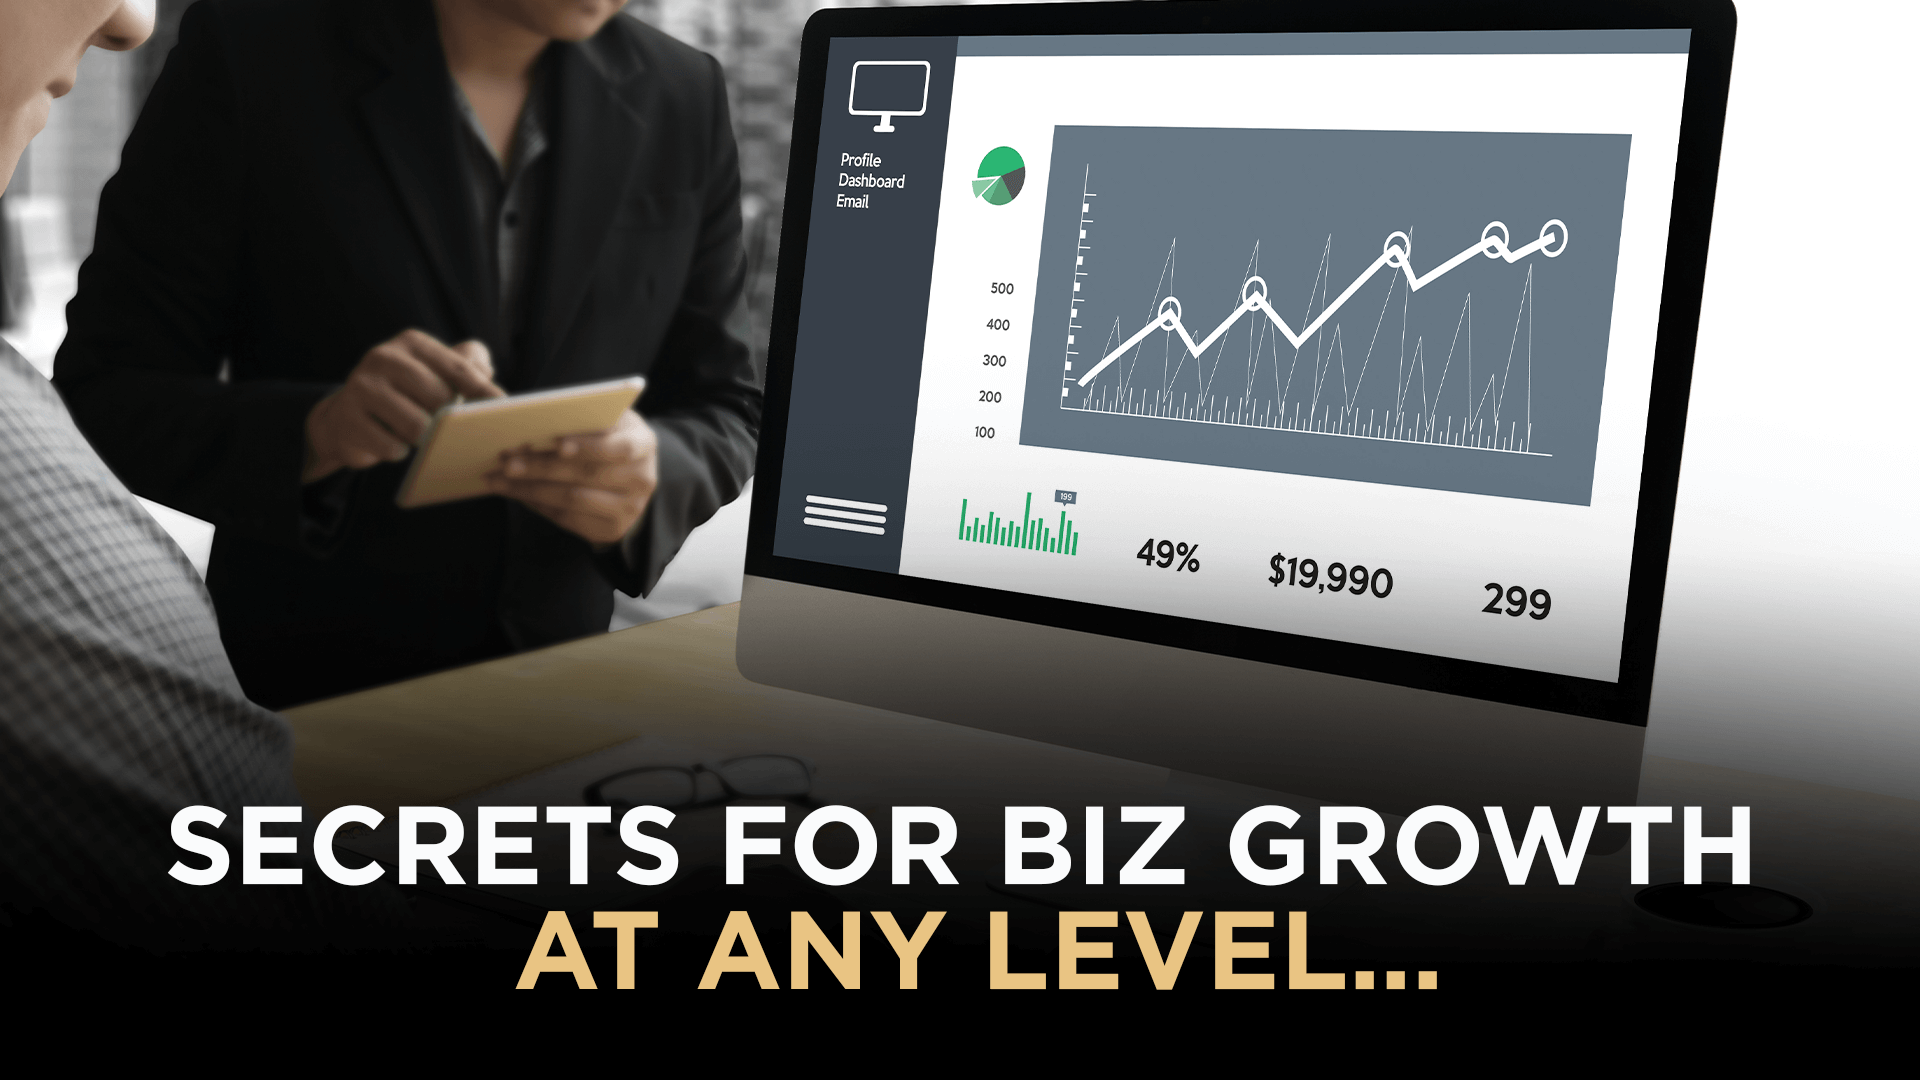 Secrets for biz growth at any level